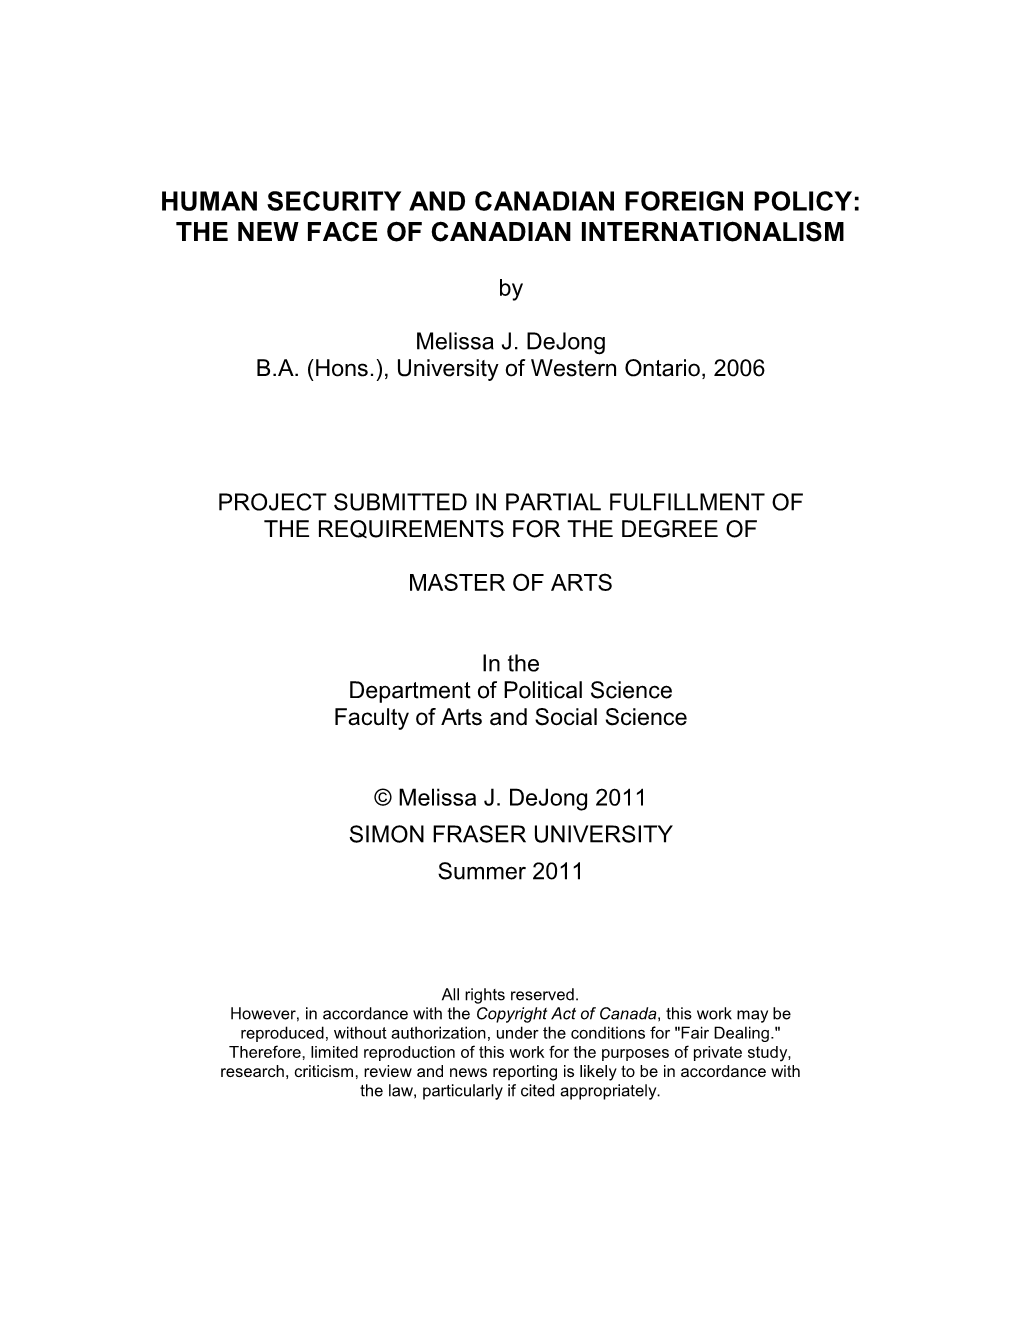 Human Security and Canadian Foreign Policy: the New Face of Canadian Internationalism